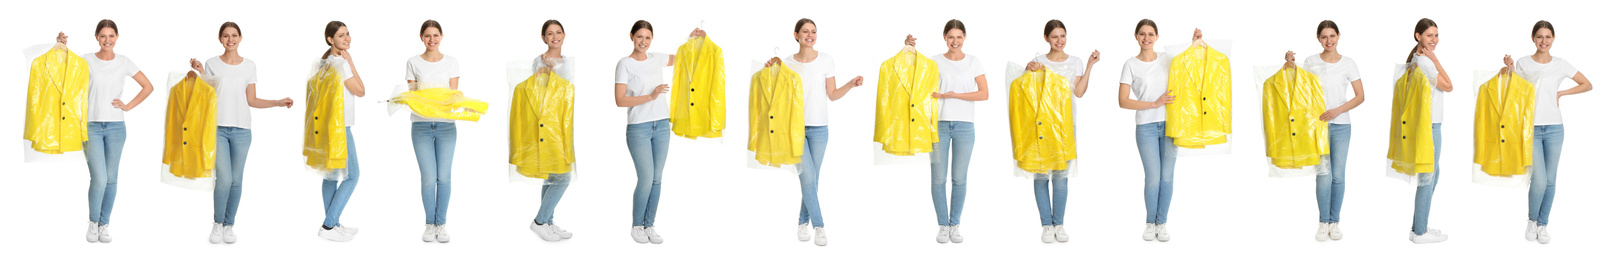 Collage of woman holding hanger with clothes on white background. Dry-cleaning service